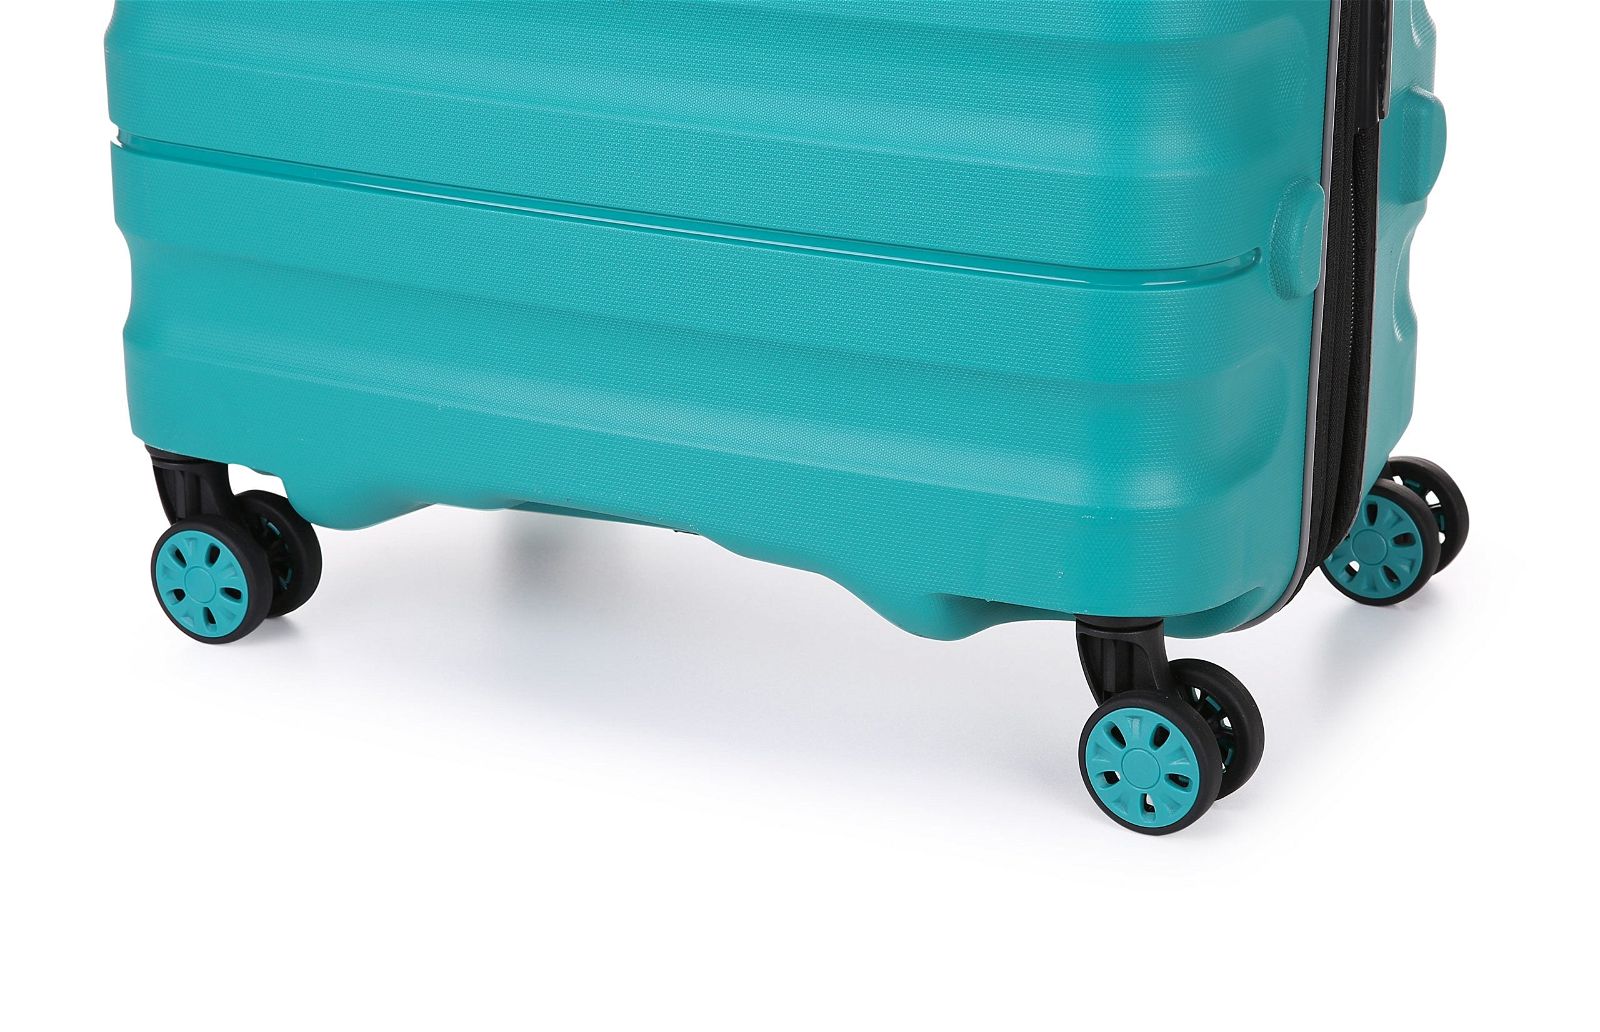 Antler - Lincoln Small 56cm Hardside 4 Wheel Suitcase - Teal - rainbowbags